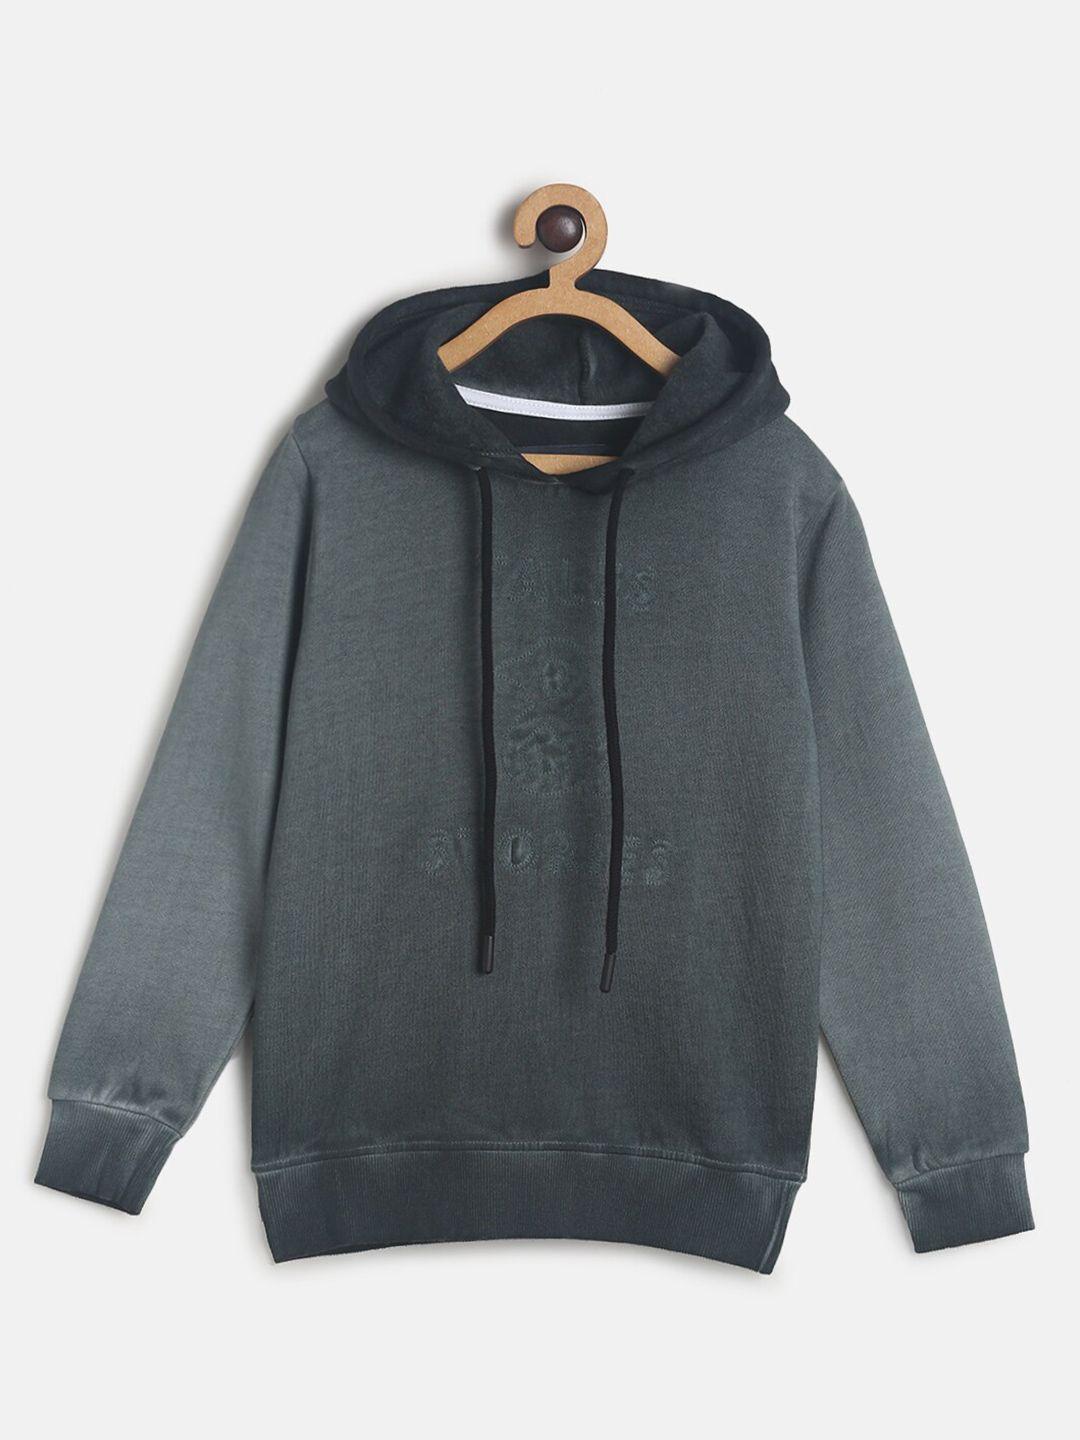 TALES & STORIES Boys Black Solid Hooded Pullover